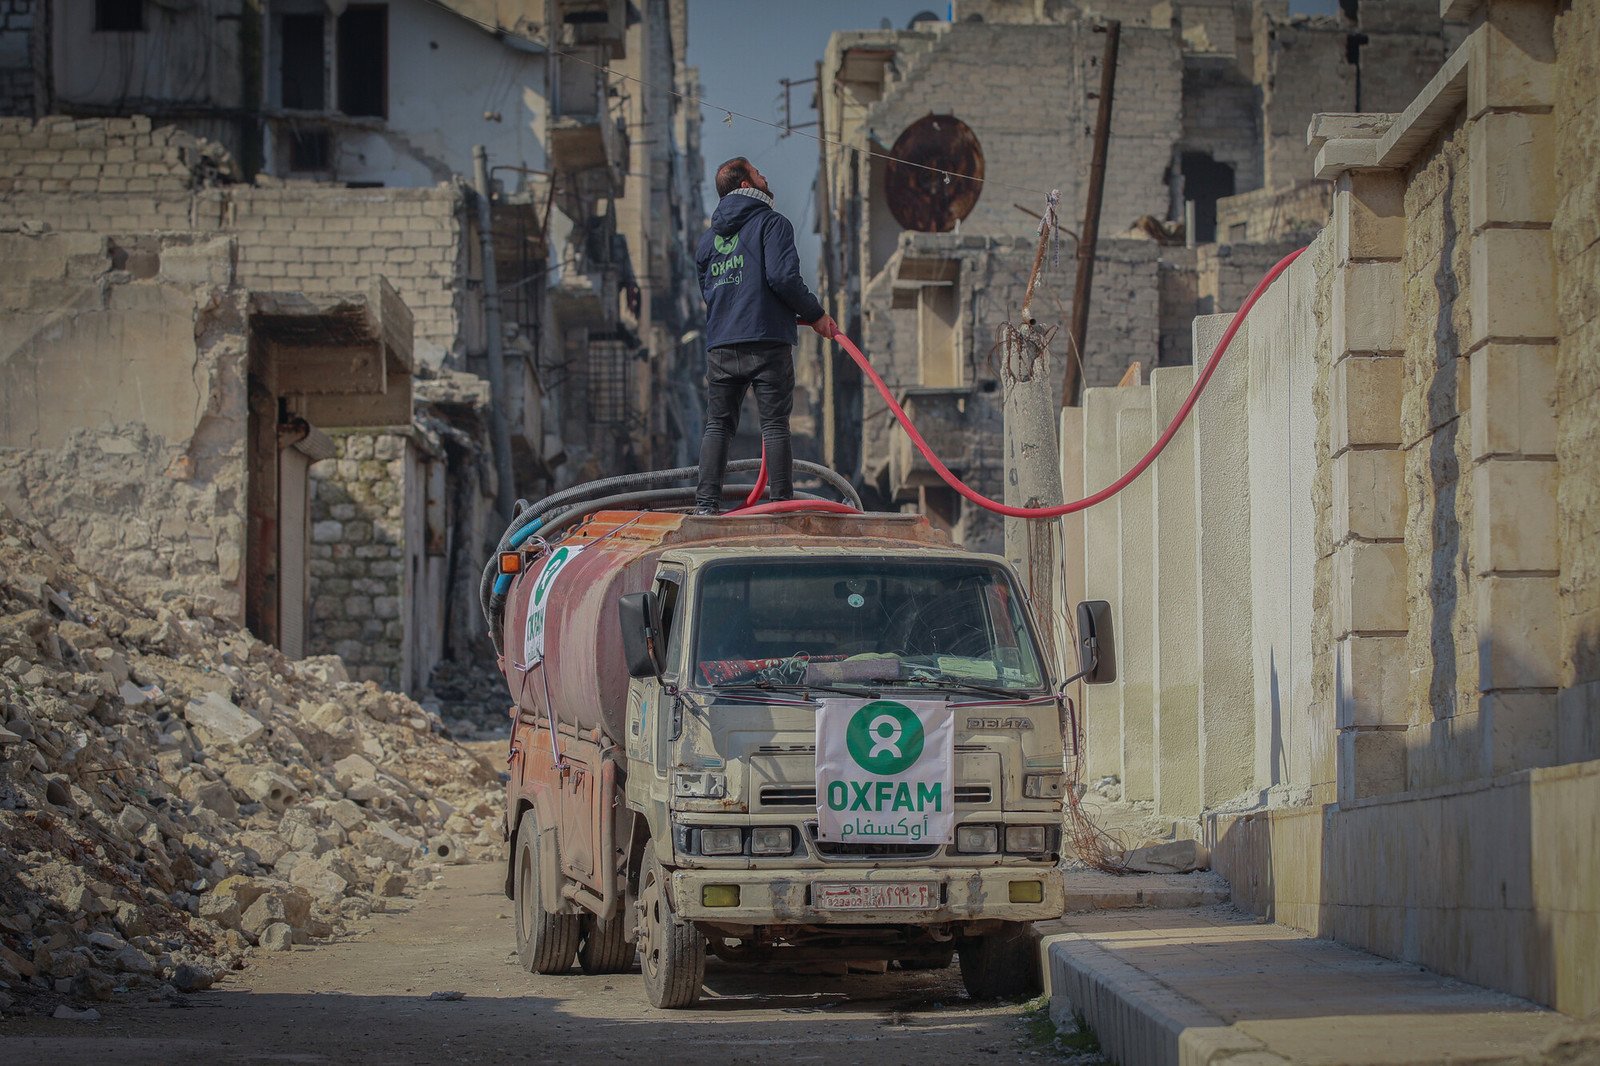 Oxfam delivering water to shelters in Aleppo city.